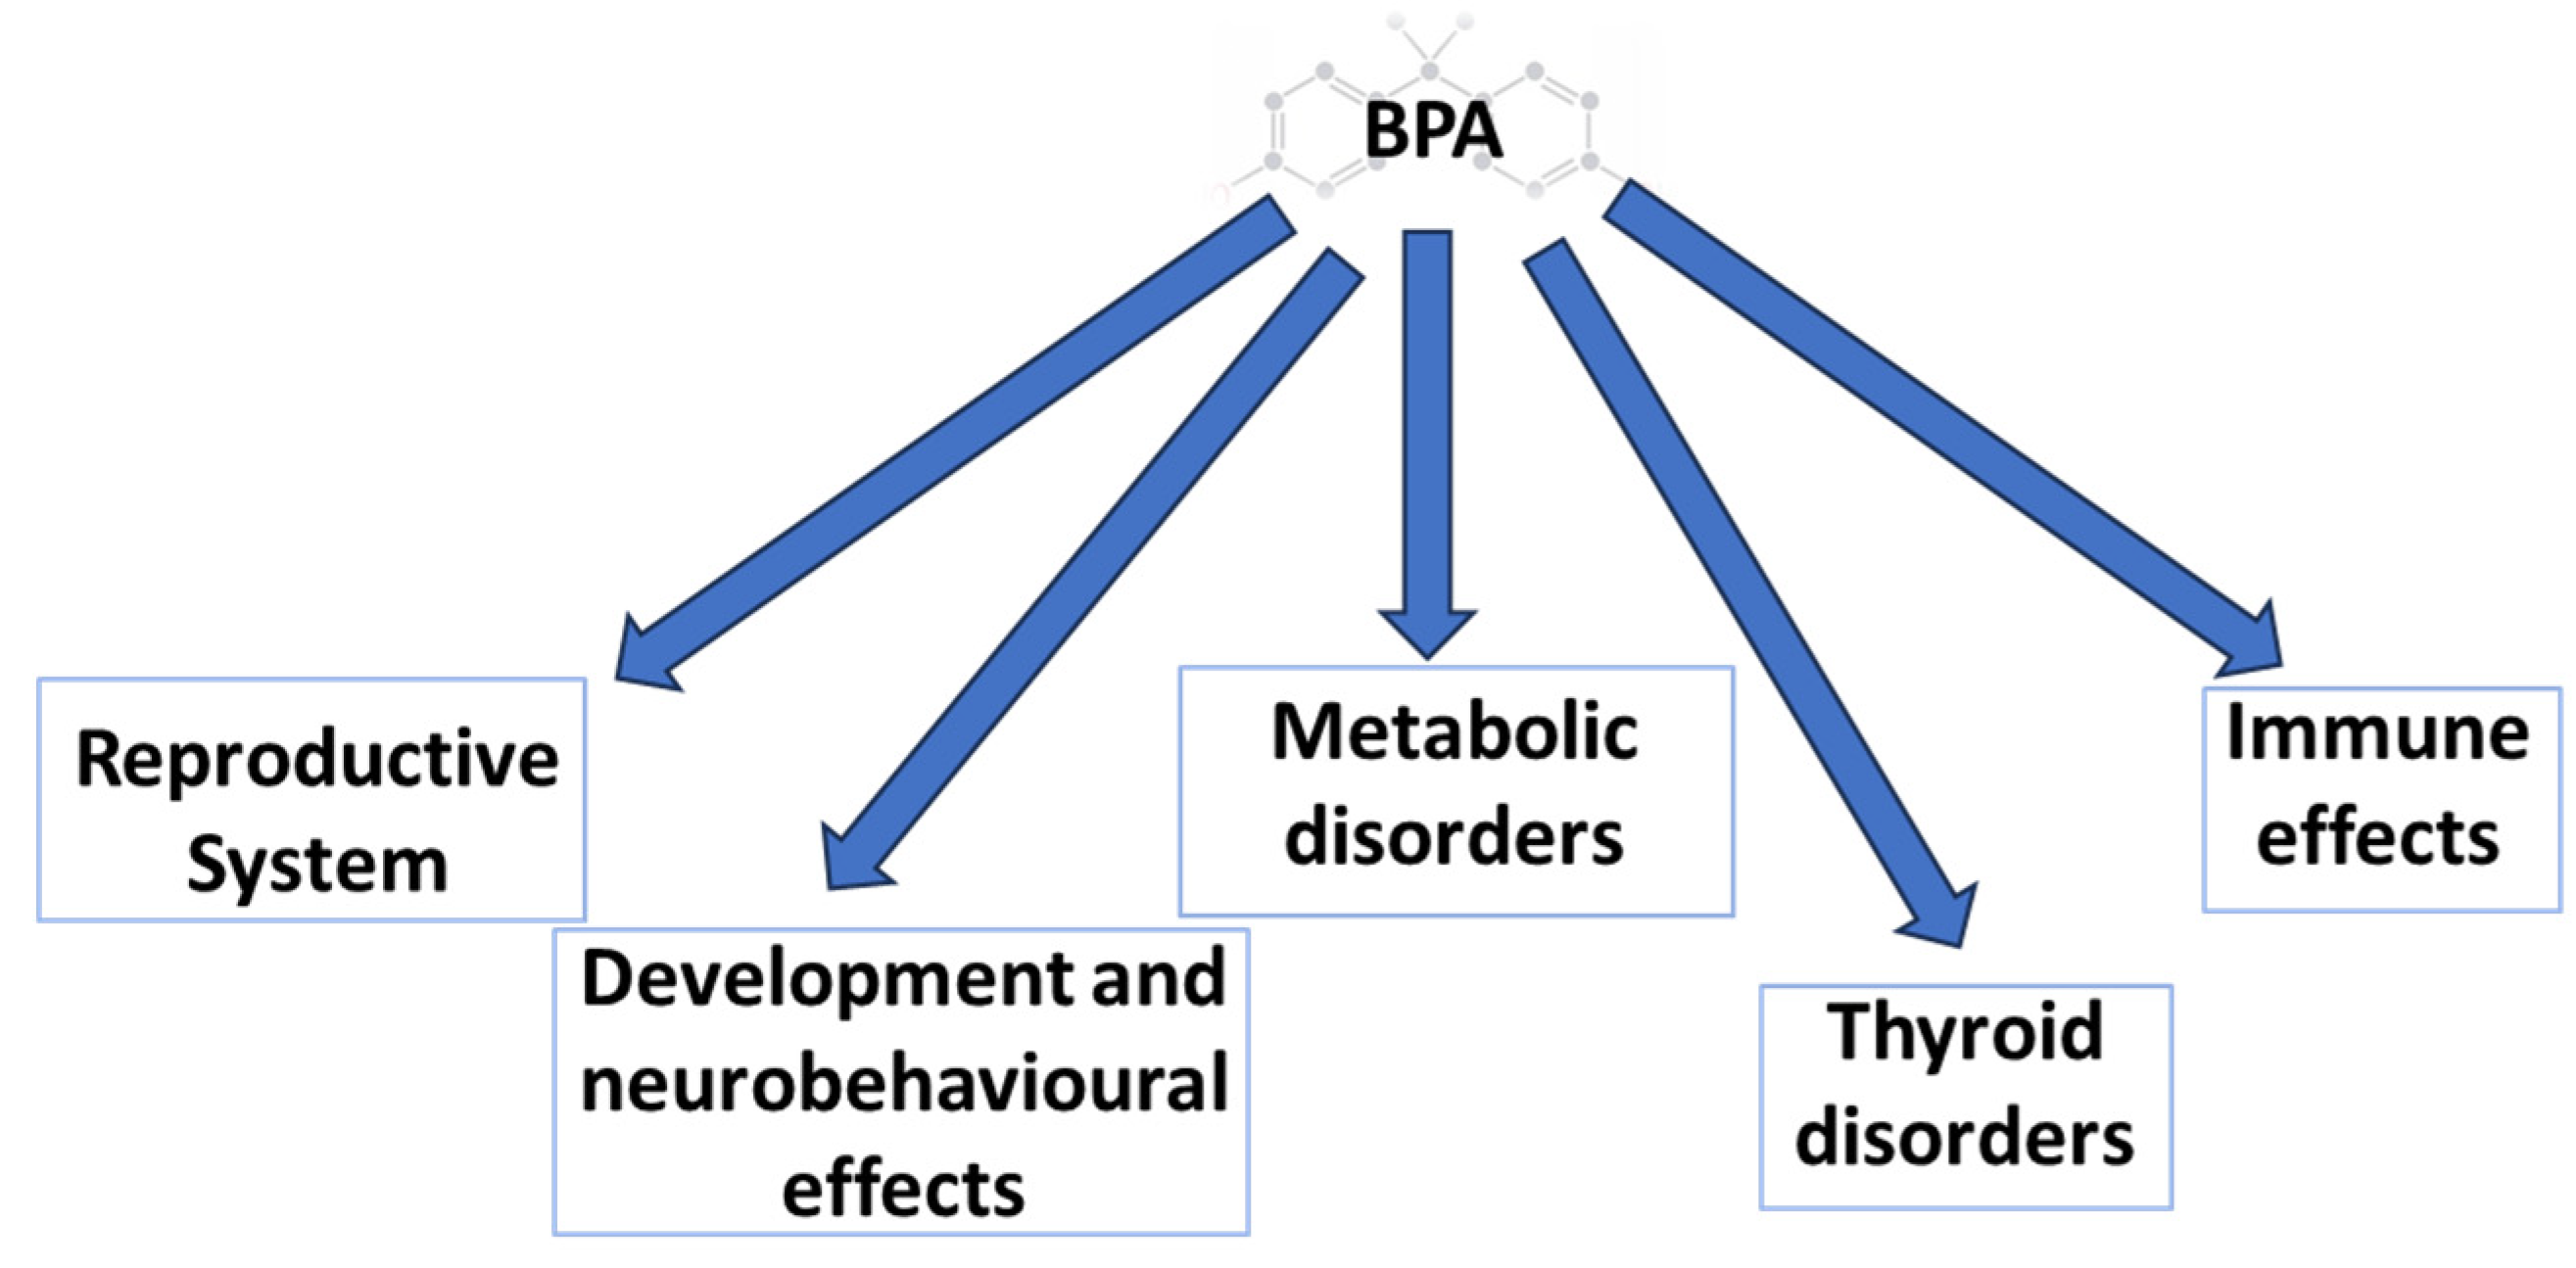 BPA exposure causes early onset puberty in rats - EHN